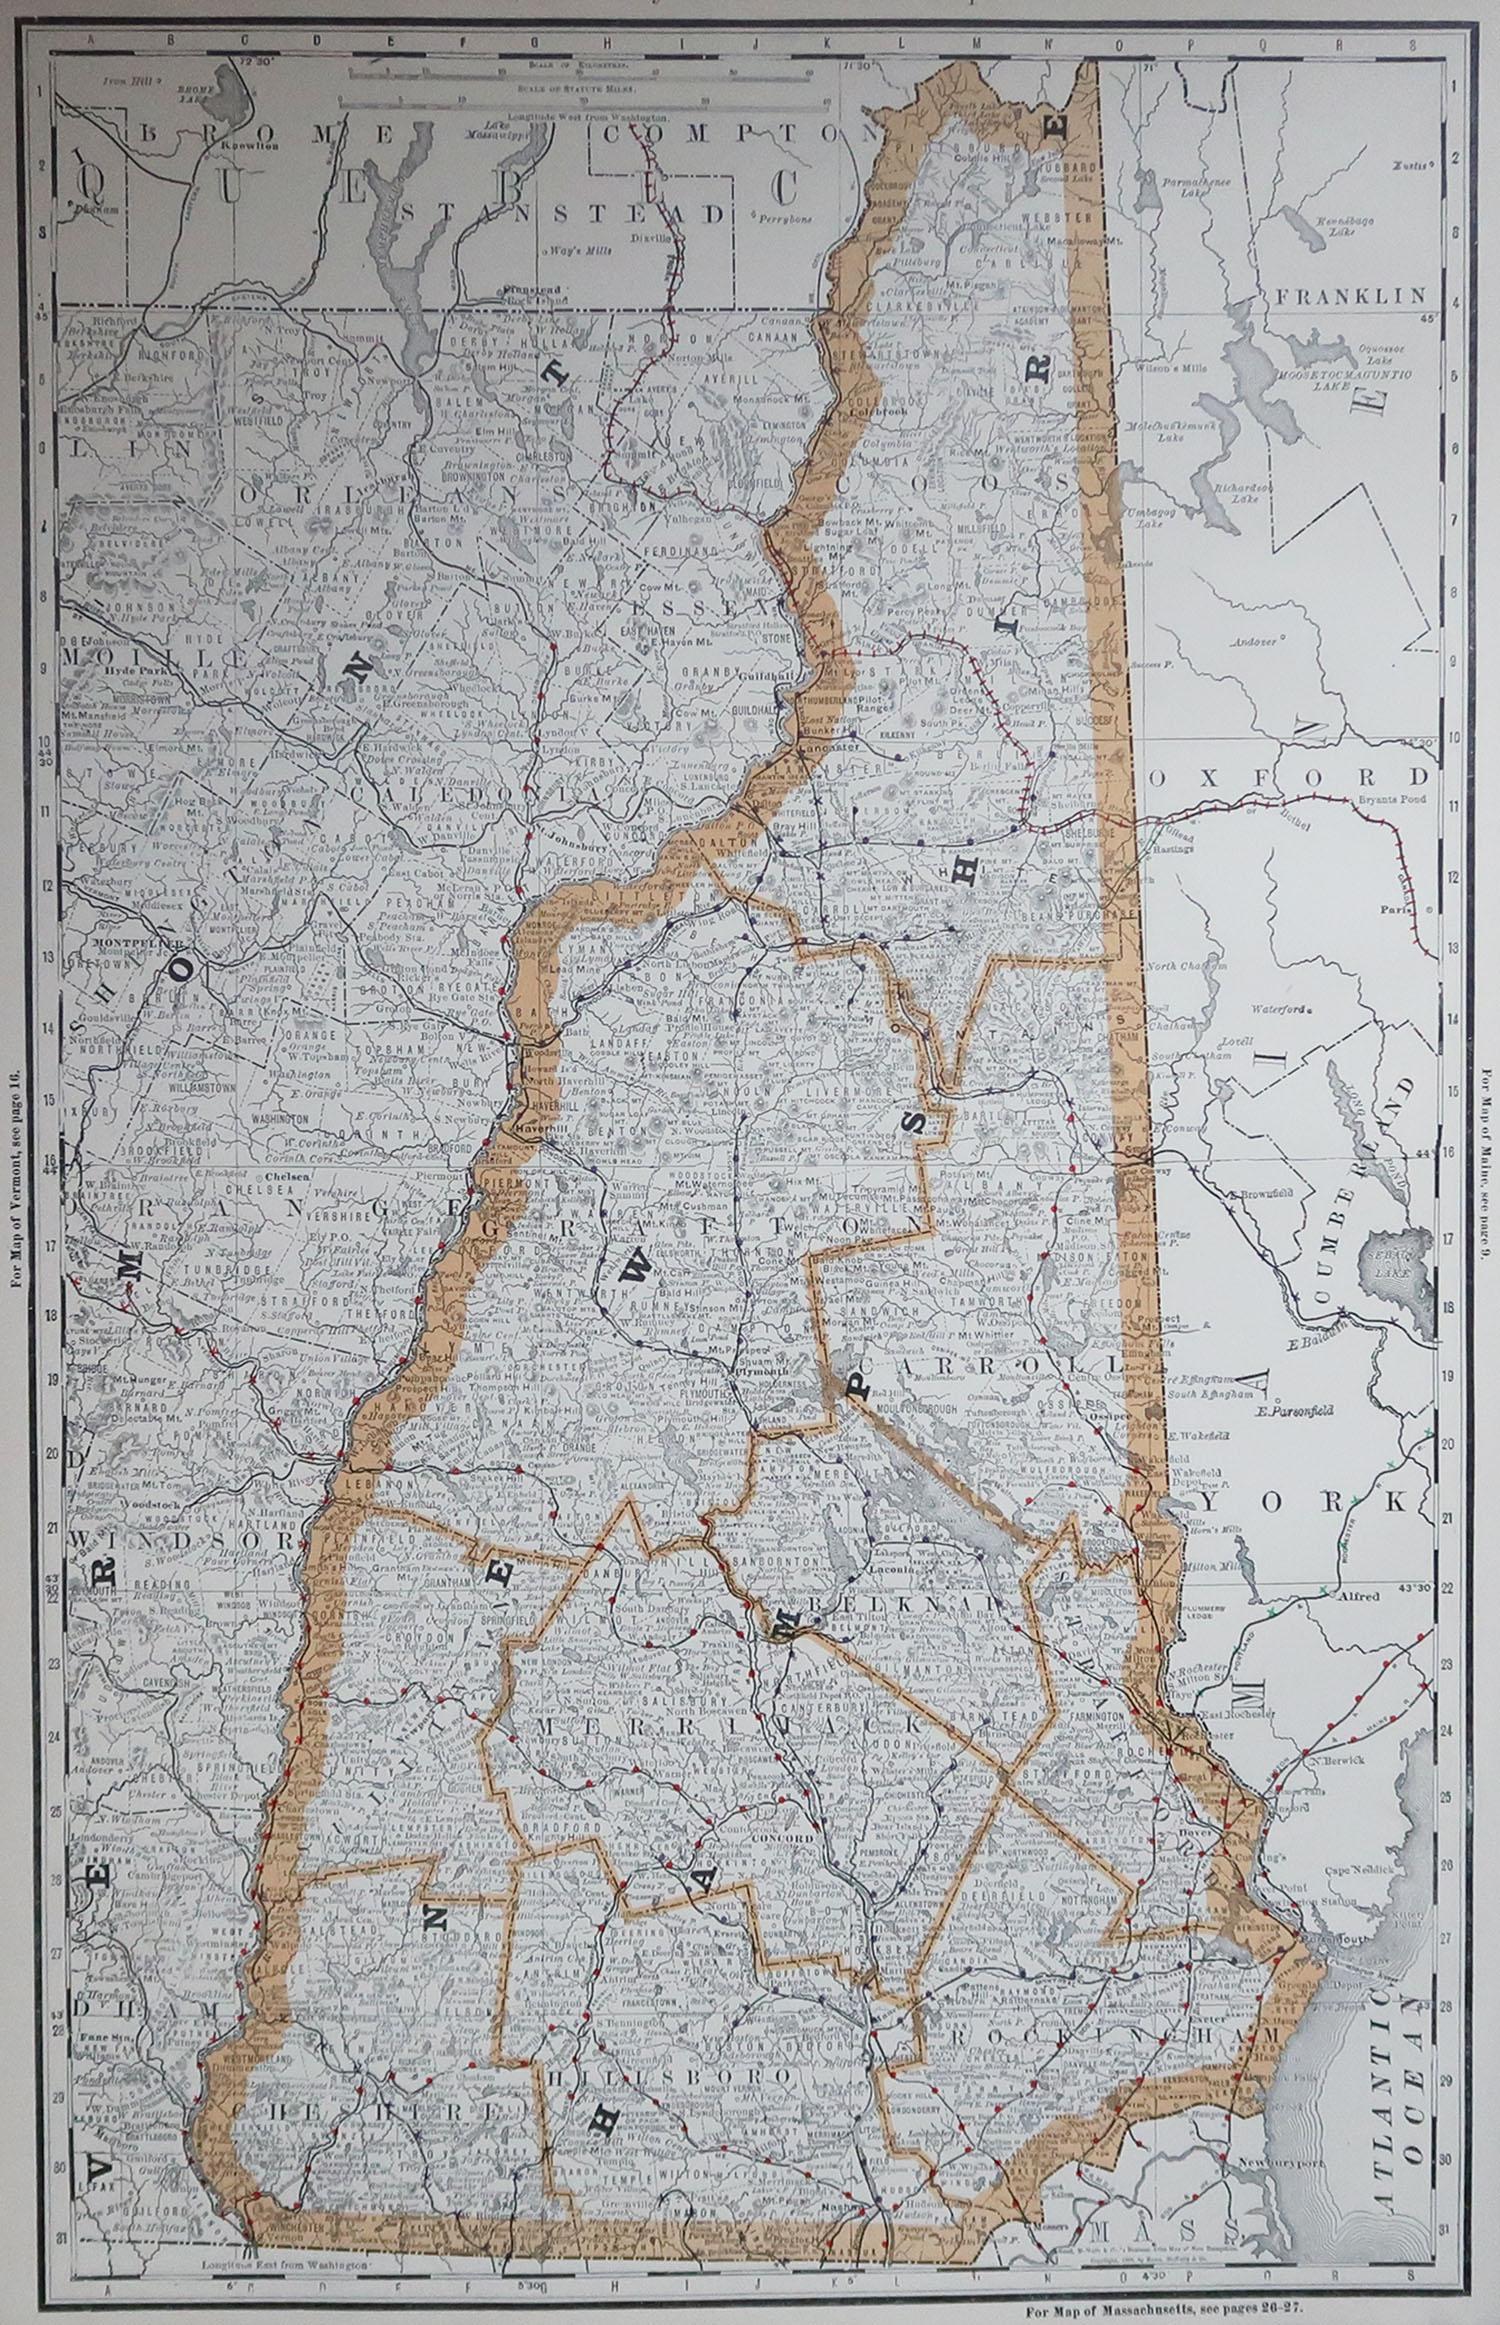 Fabulous map of New Hampshire

Original color

By Rand, McNally & Co.

Published, 1894

Unframed

Free shipping.